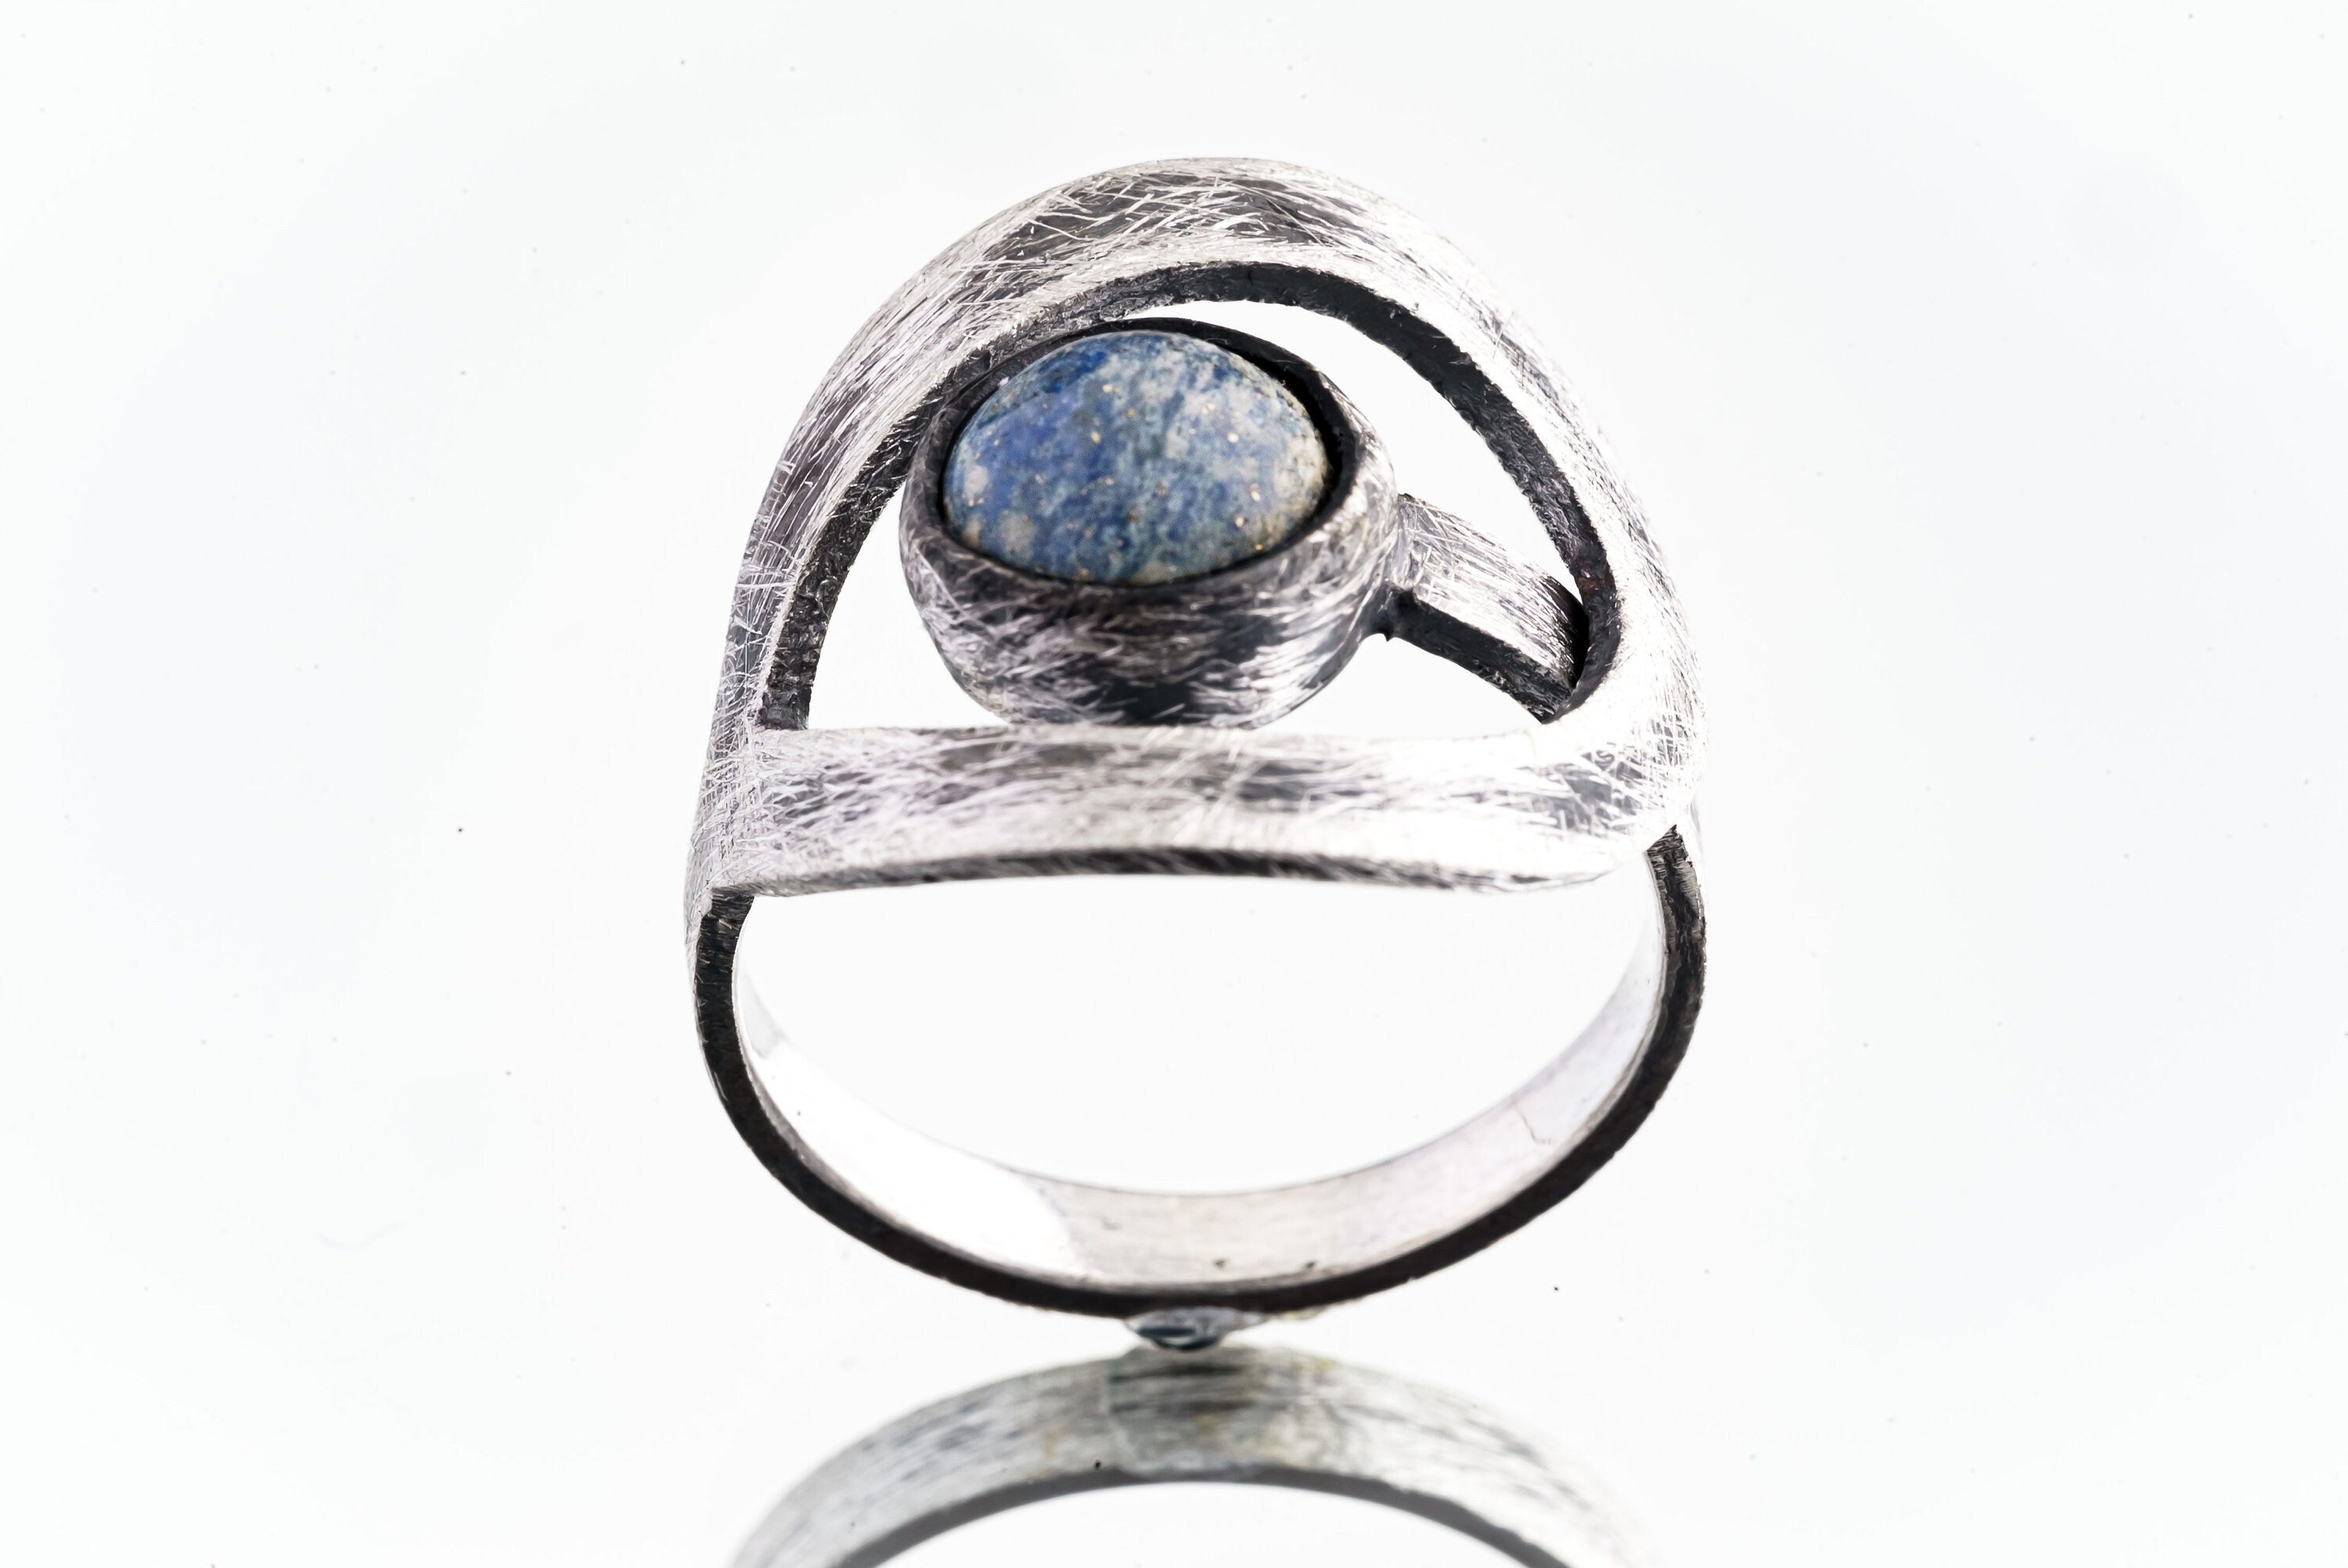 Round Lapis Lazuli - 925 Sterling Silver - Heavy Set Adjustable Loop Ring - Scratch Textured - Size 5-9 US - NO/6